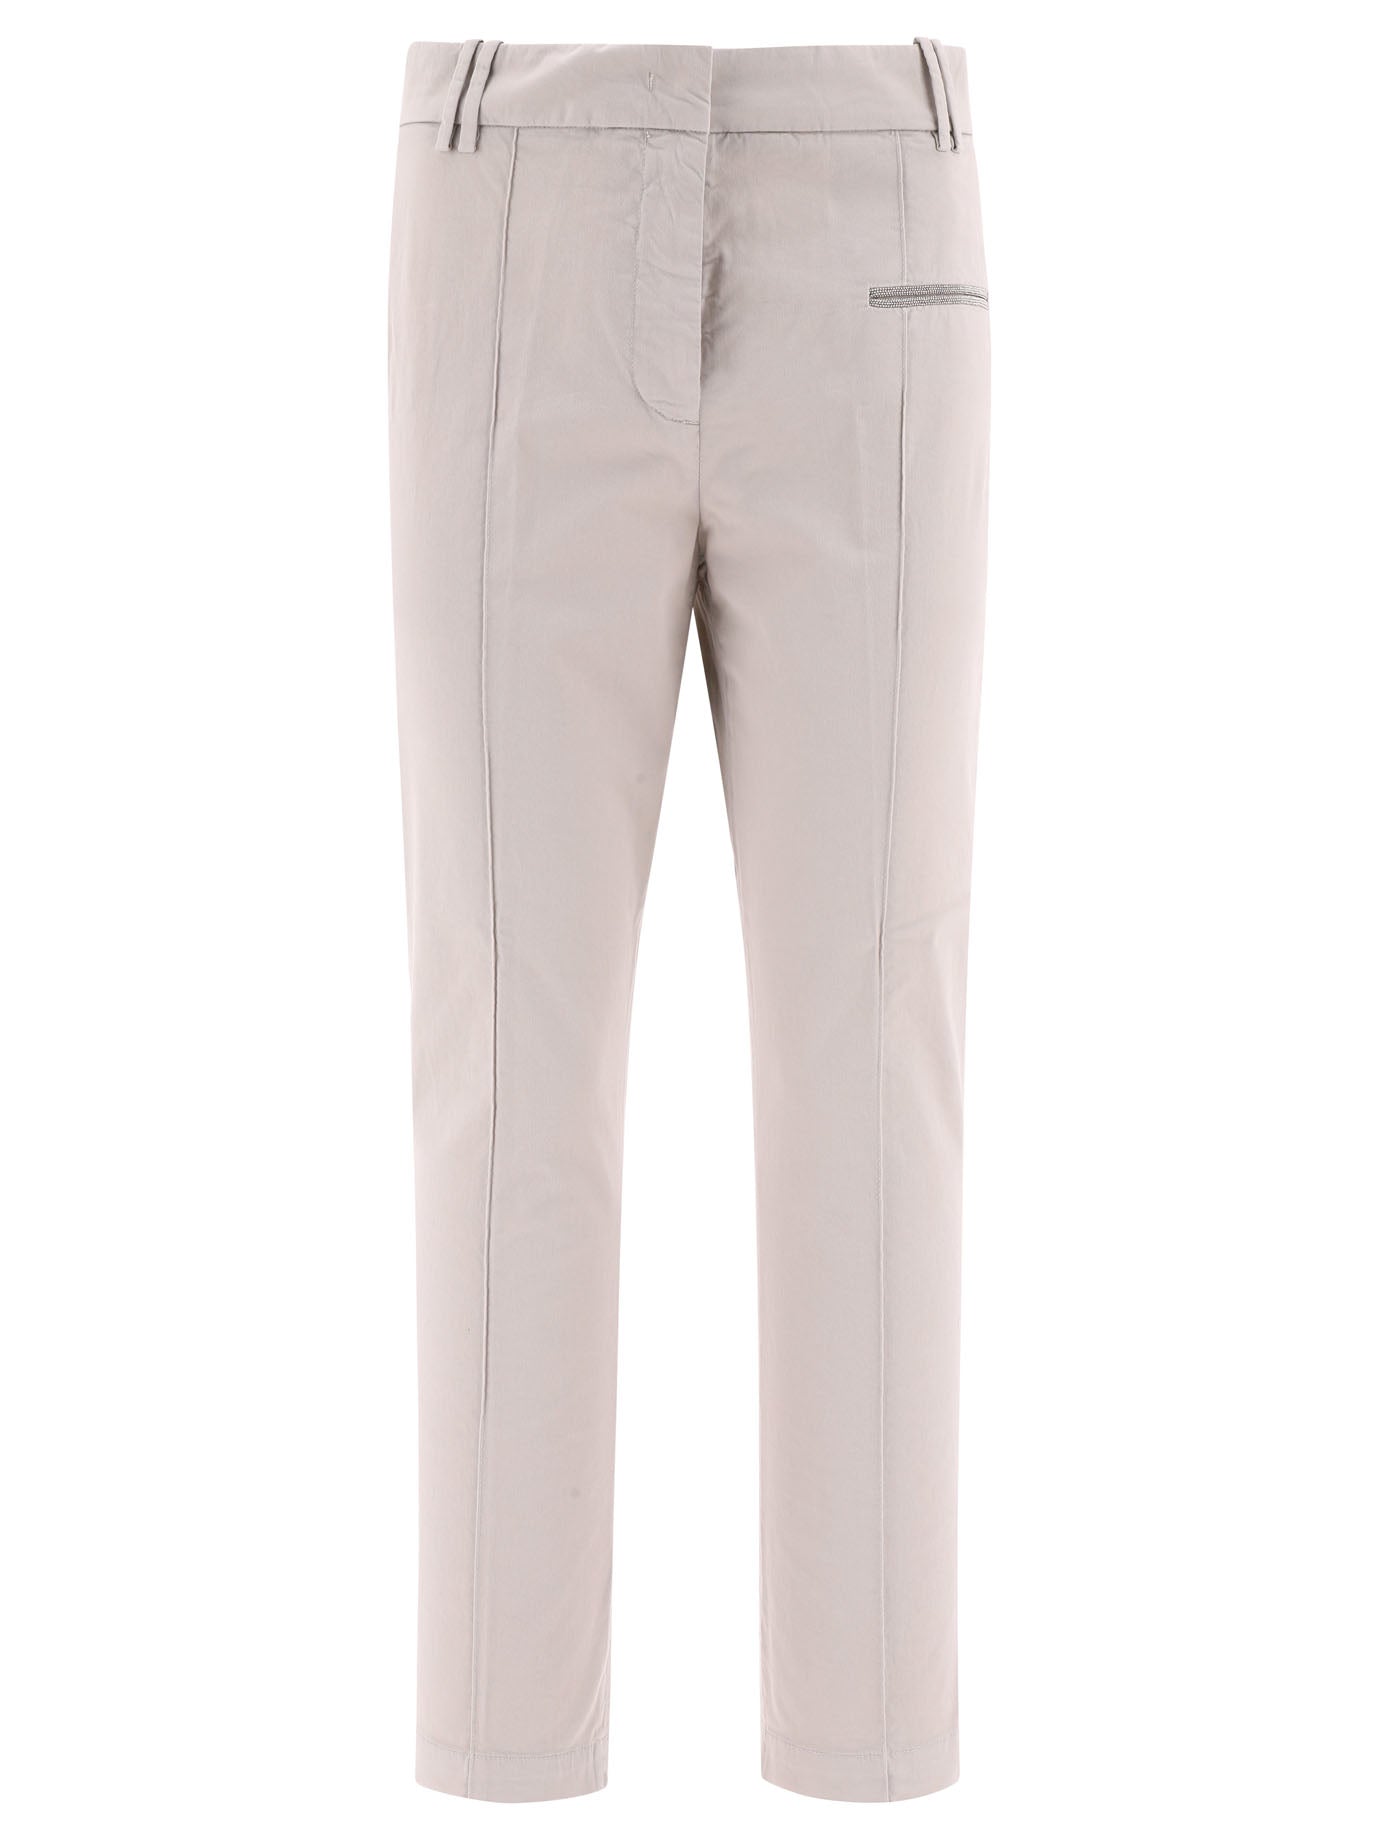 Tailored trousers - Light grey - Ladies | H&M IN